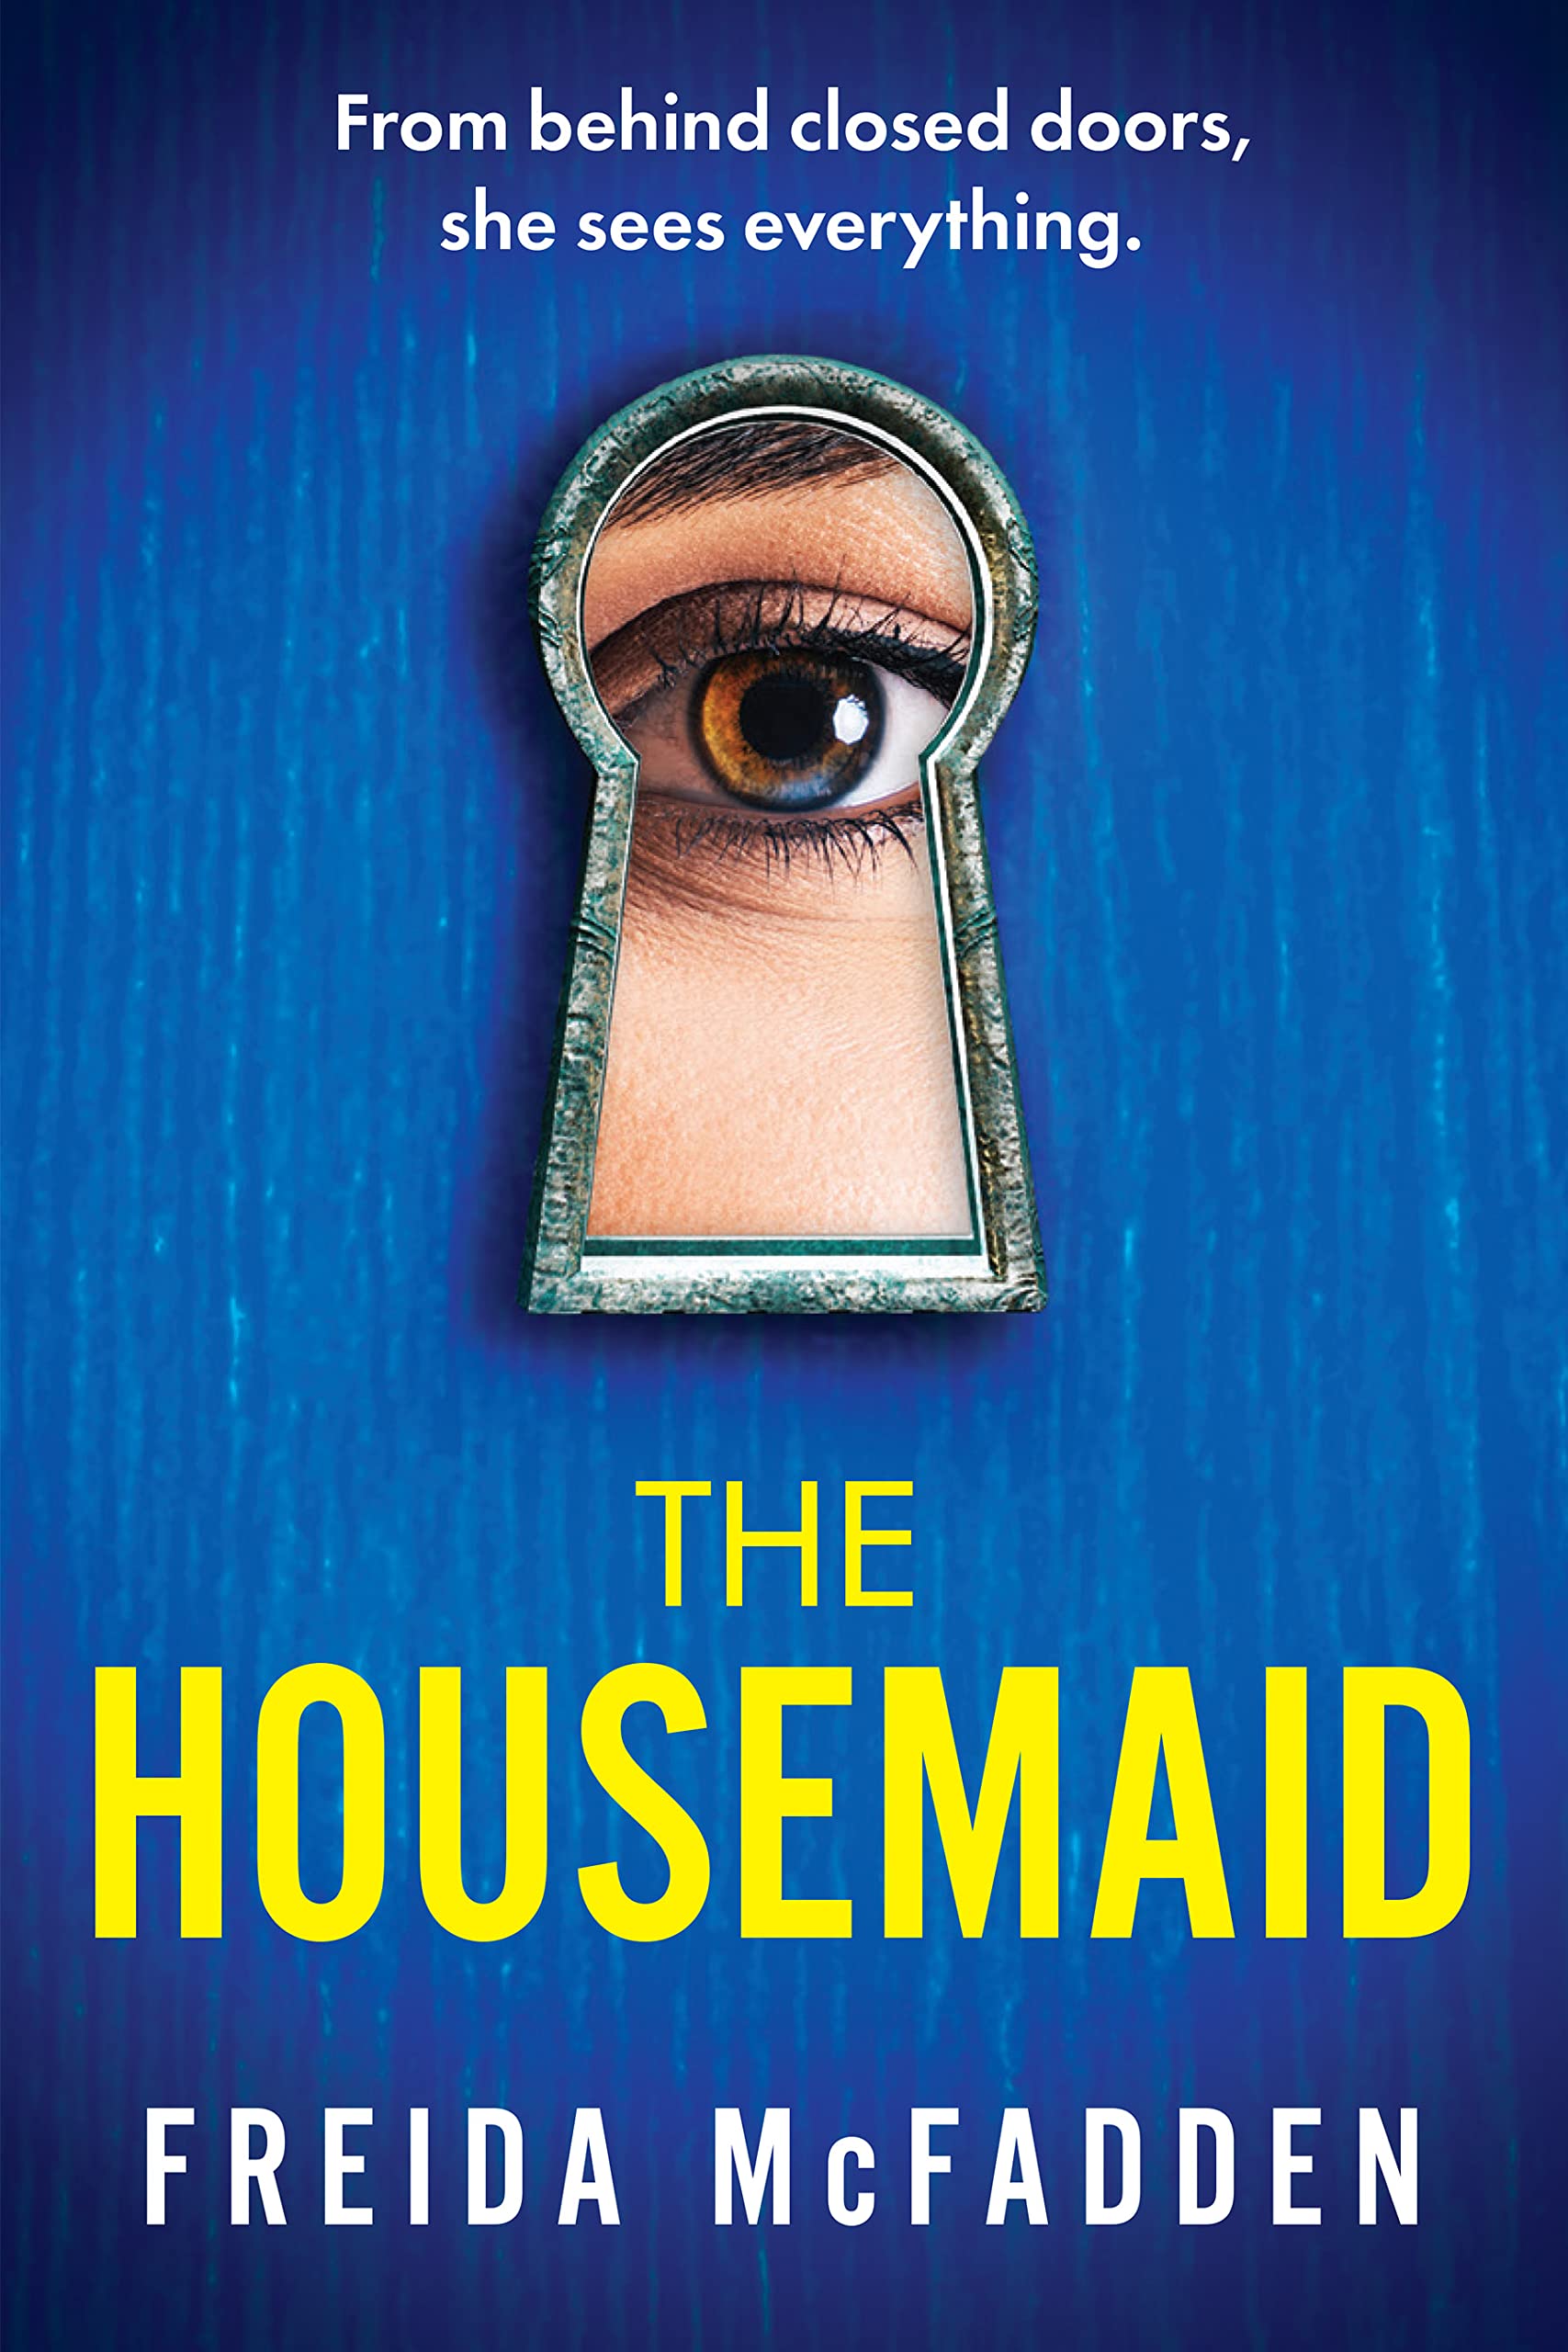 Cover of the Housemaid by Freida McFadden. Cover is blue with a keyhold and yellow lettering. 